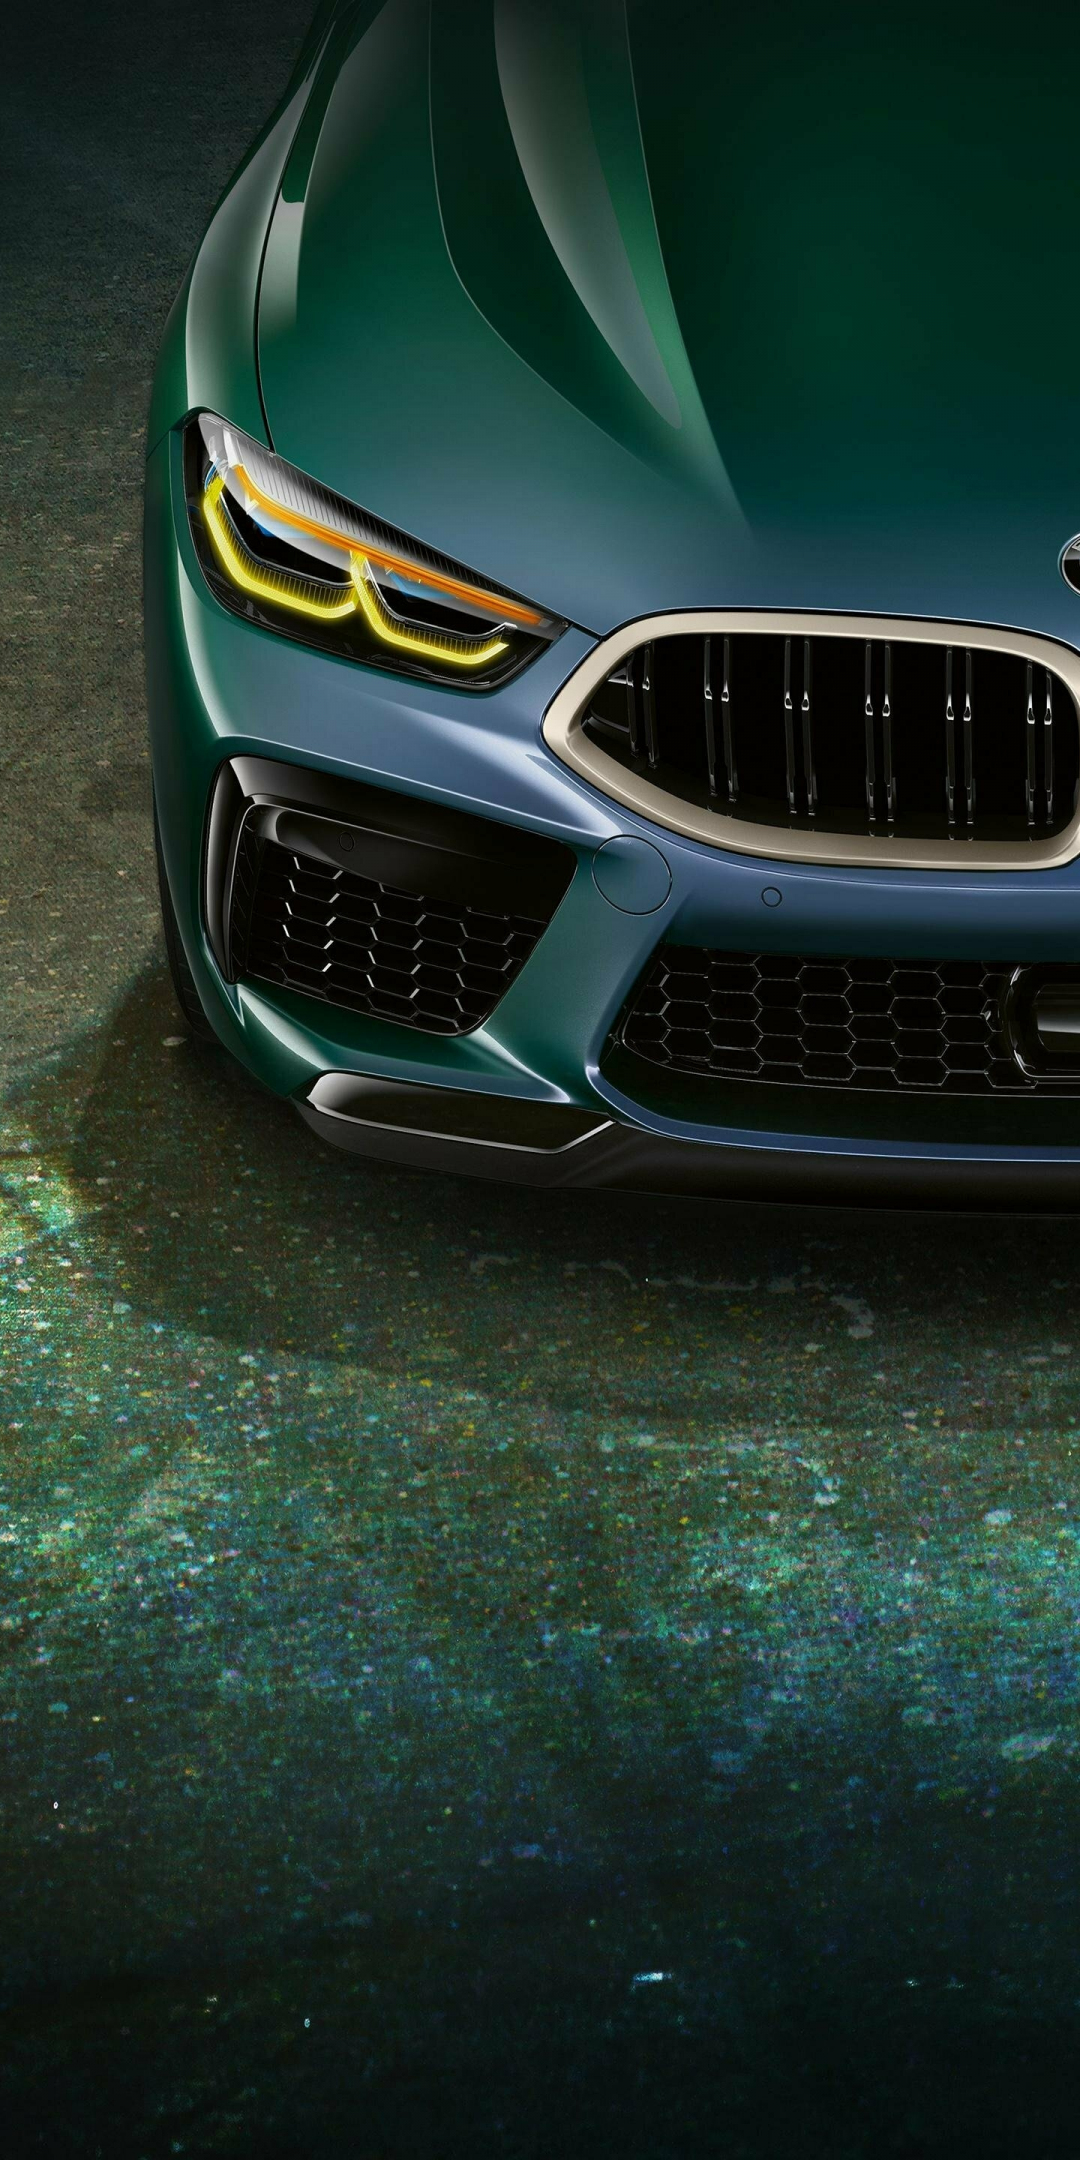 BMW M8, green and luxurious car, 1080x2160 wallpaper